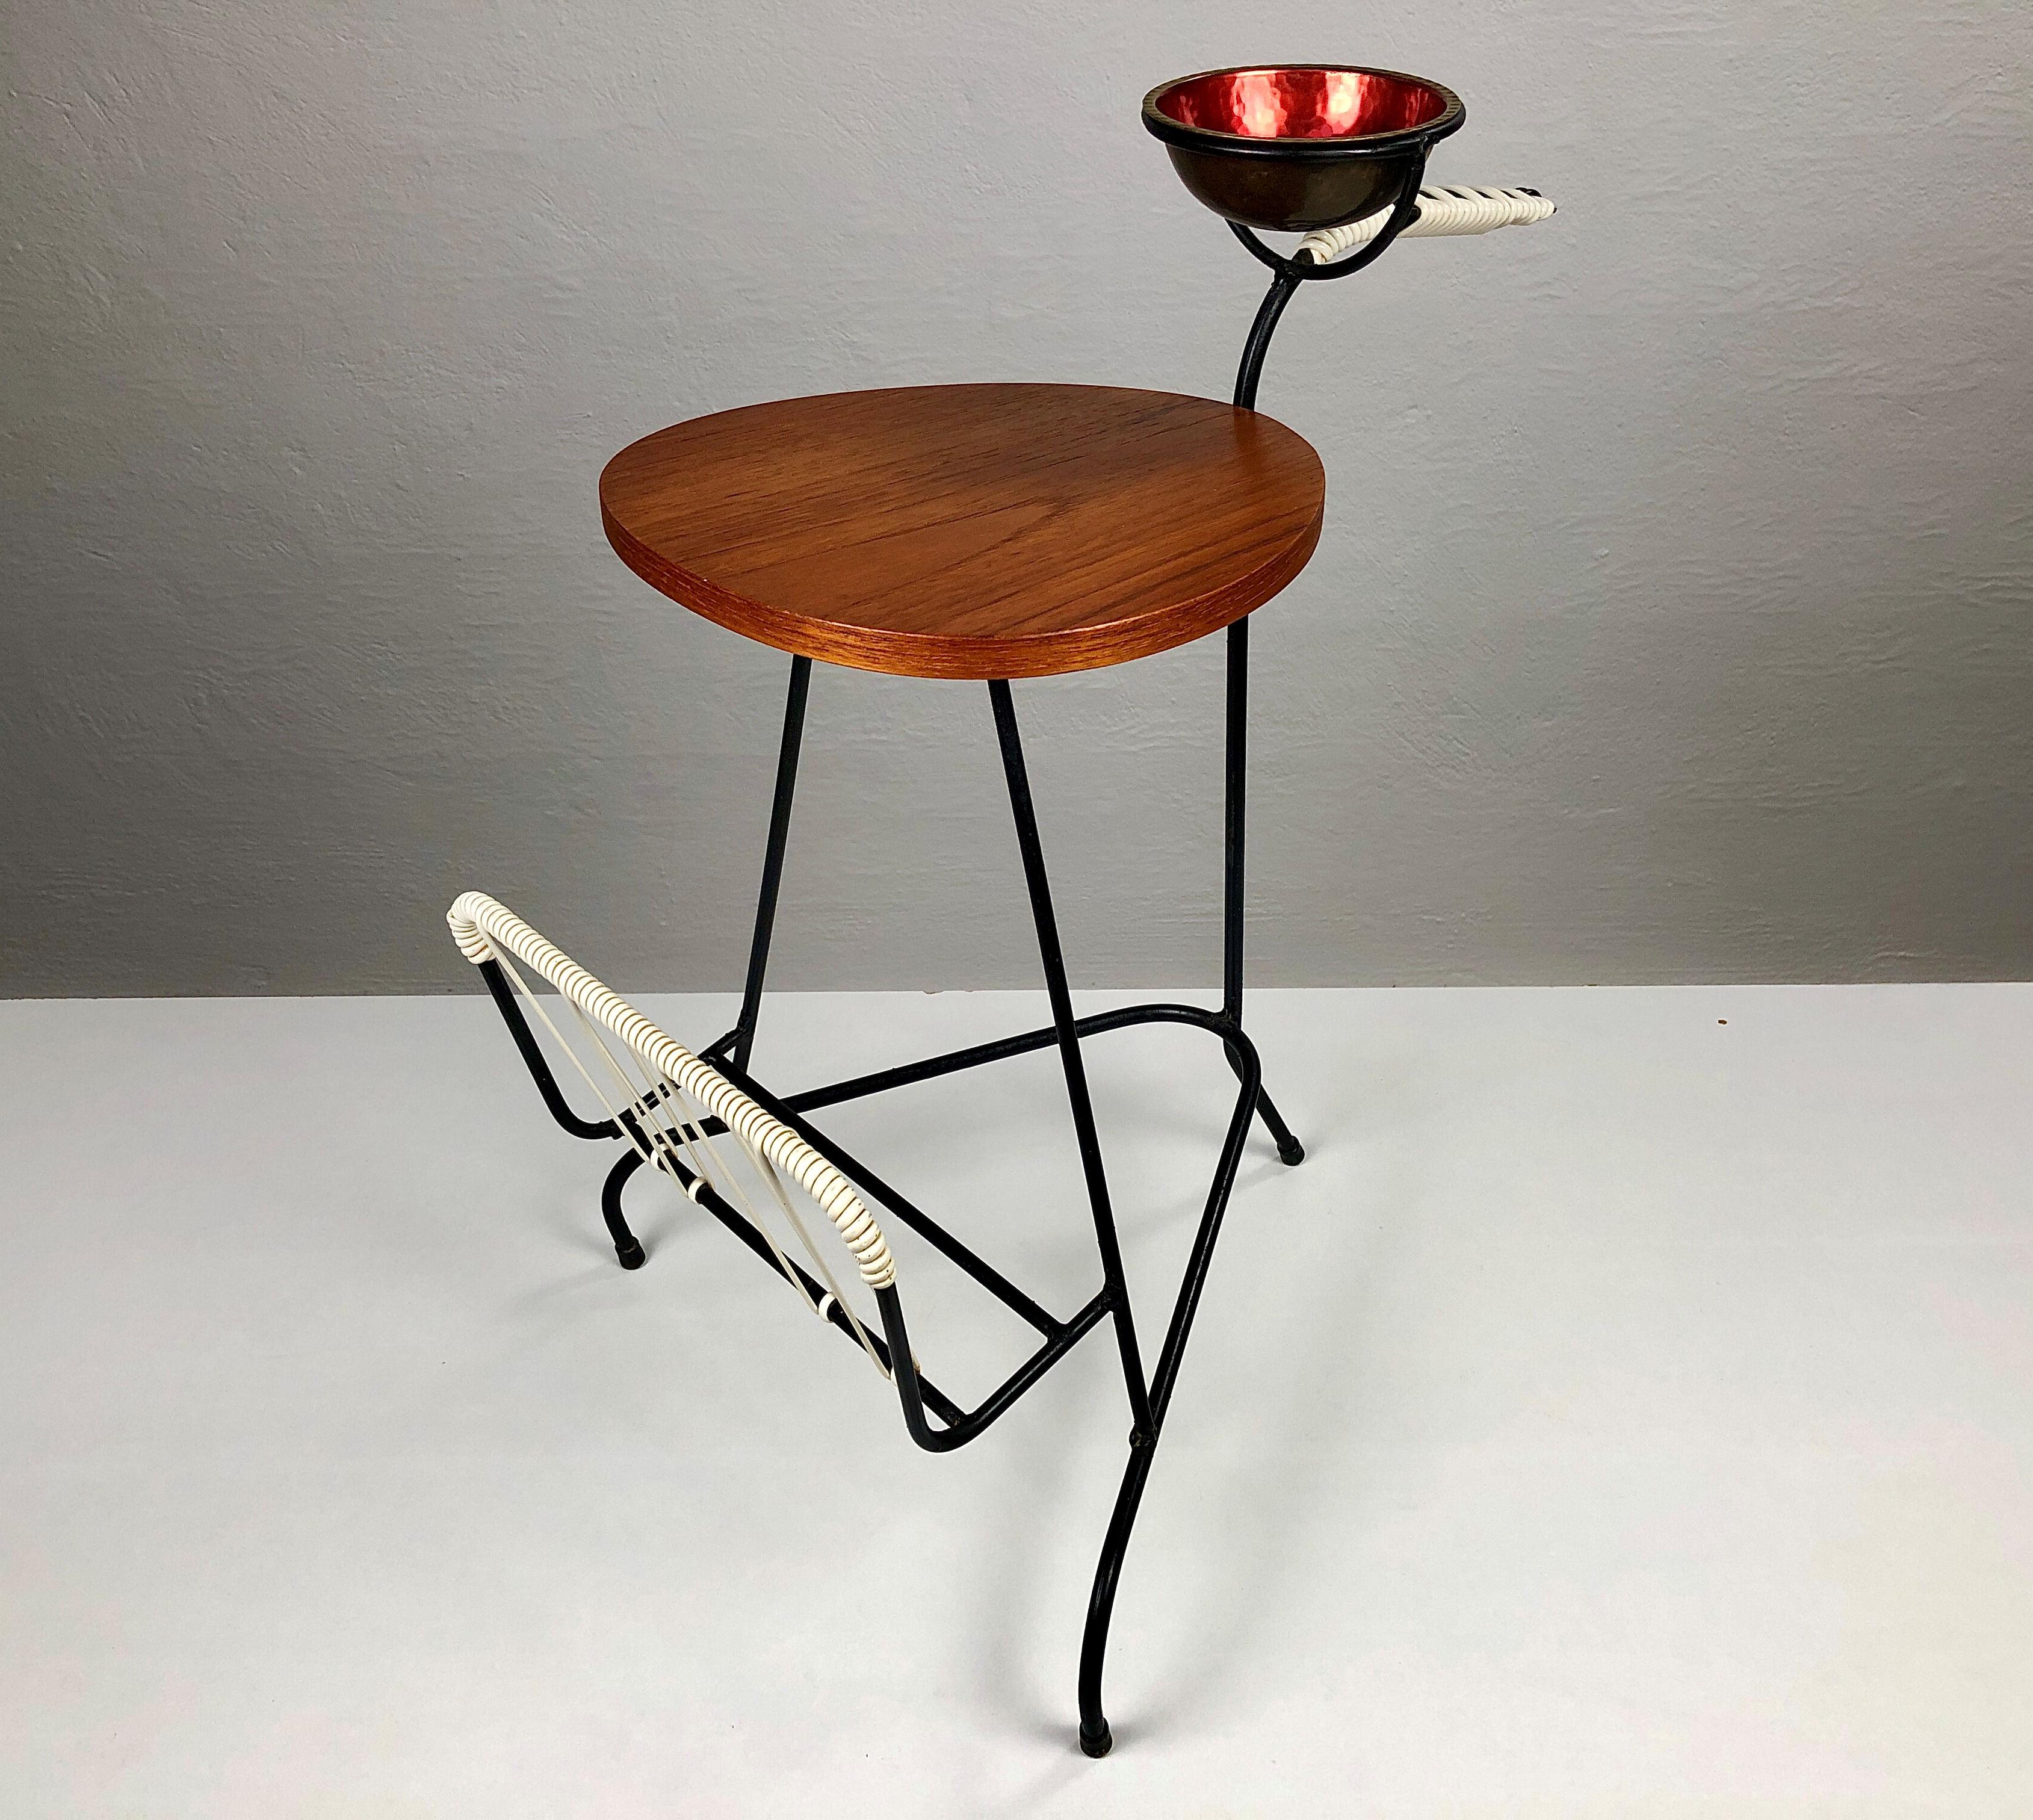 Small Danish side table - tray table in teak and black metal from the 1950 - 1960´s.

The table feature every thing you need for a small break with a small teak table top for a cup of coffee or a drink and perhaps a piece of cake, a hammered